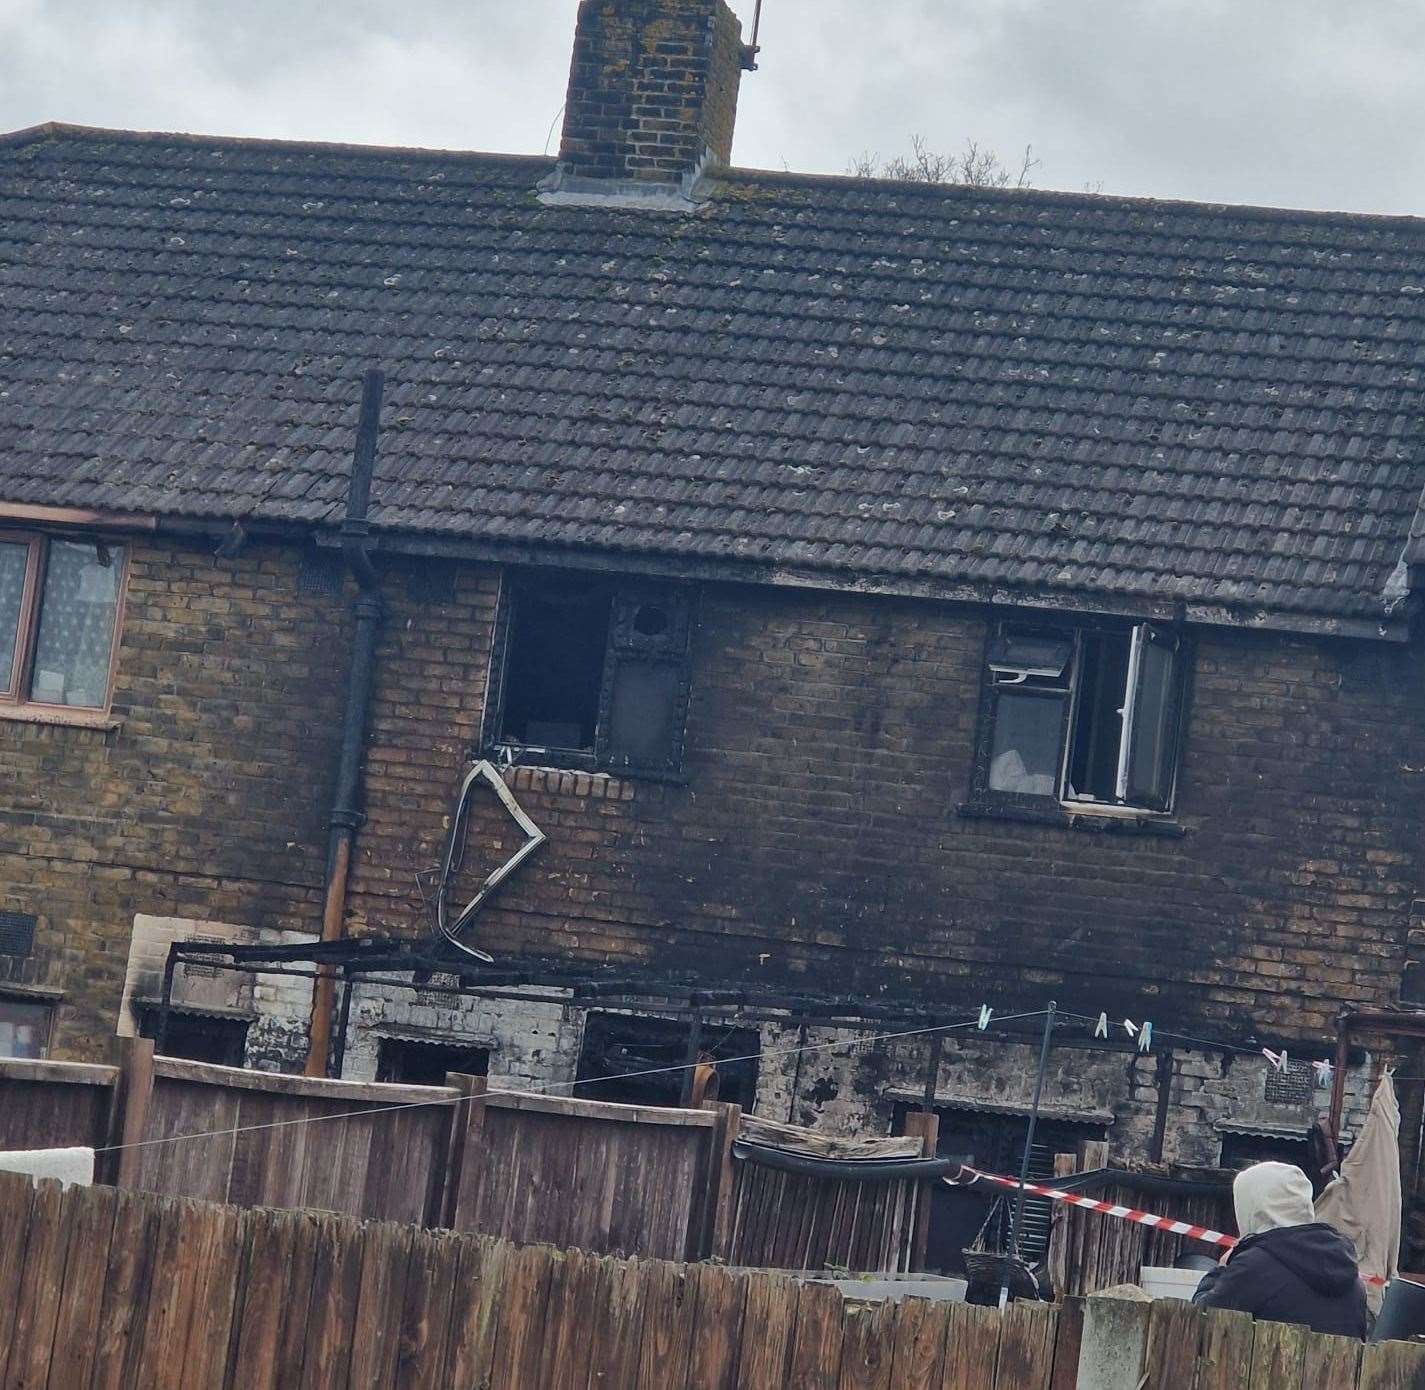 The fire damage to the home in Darnley Road, Strood. Photo: Tierney Hodges